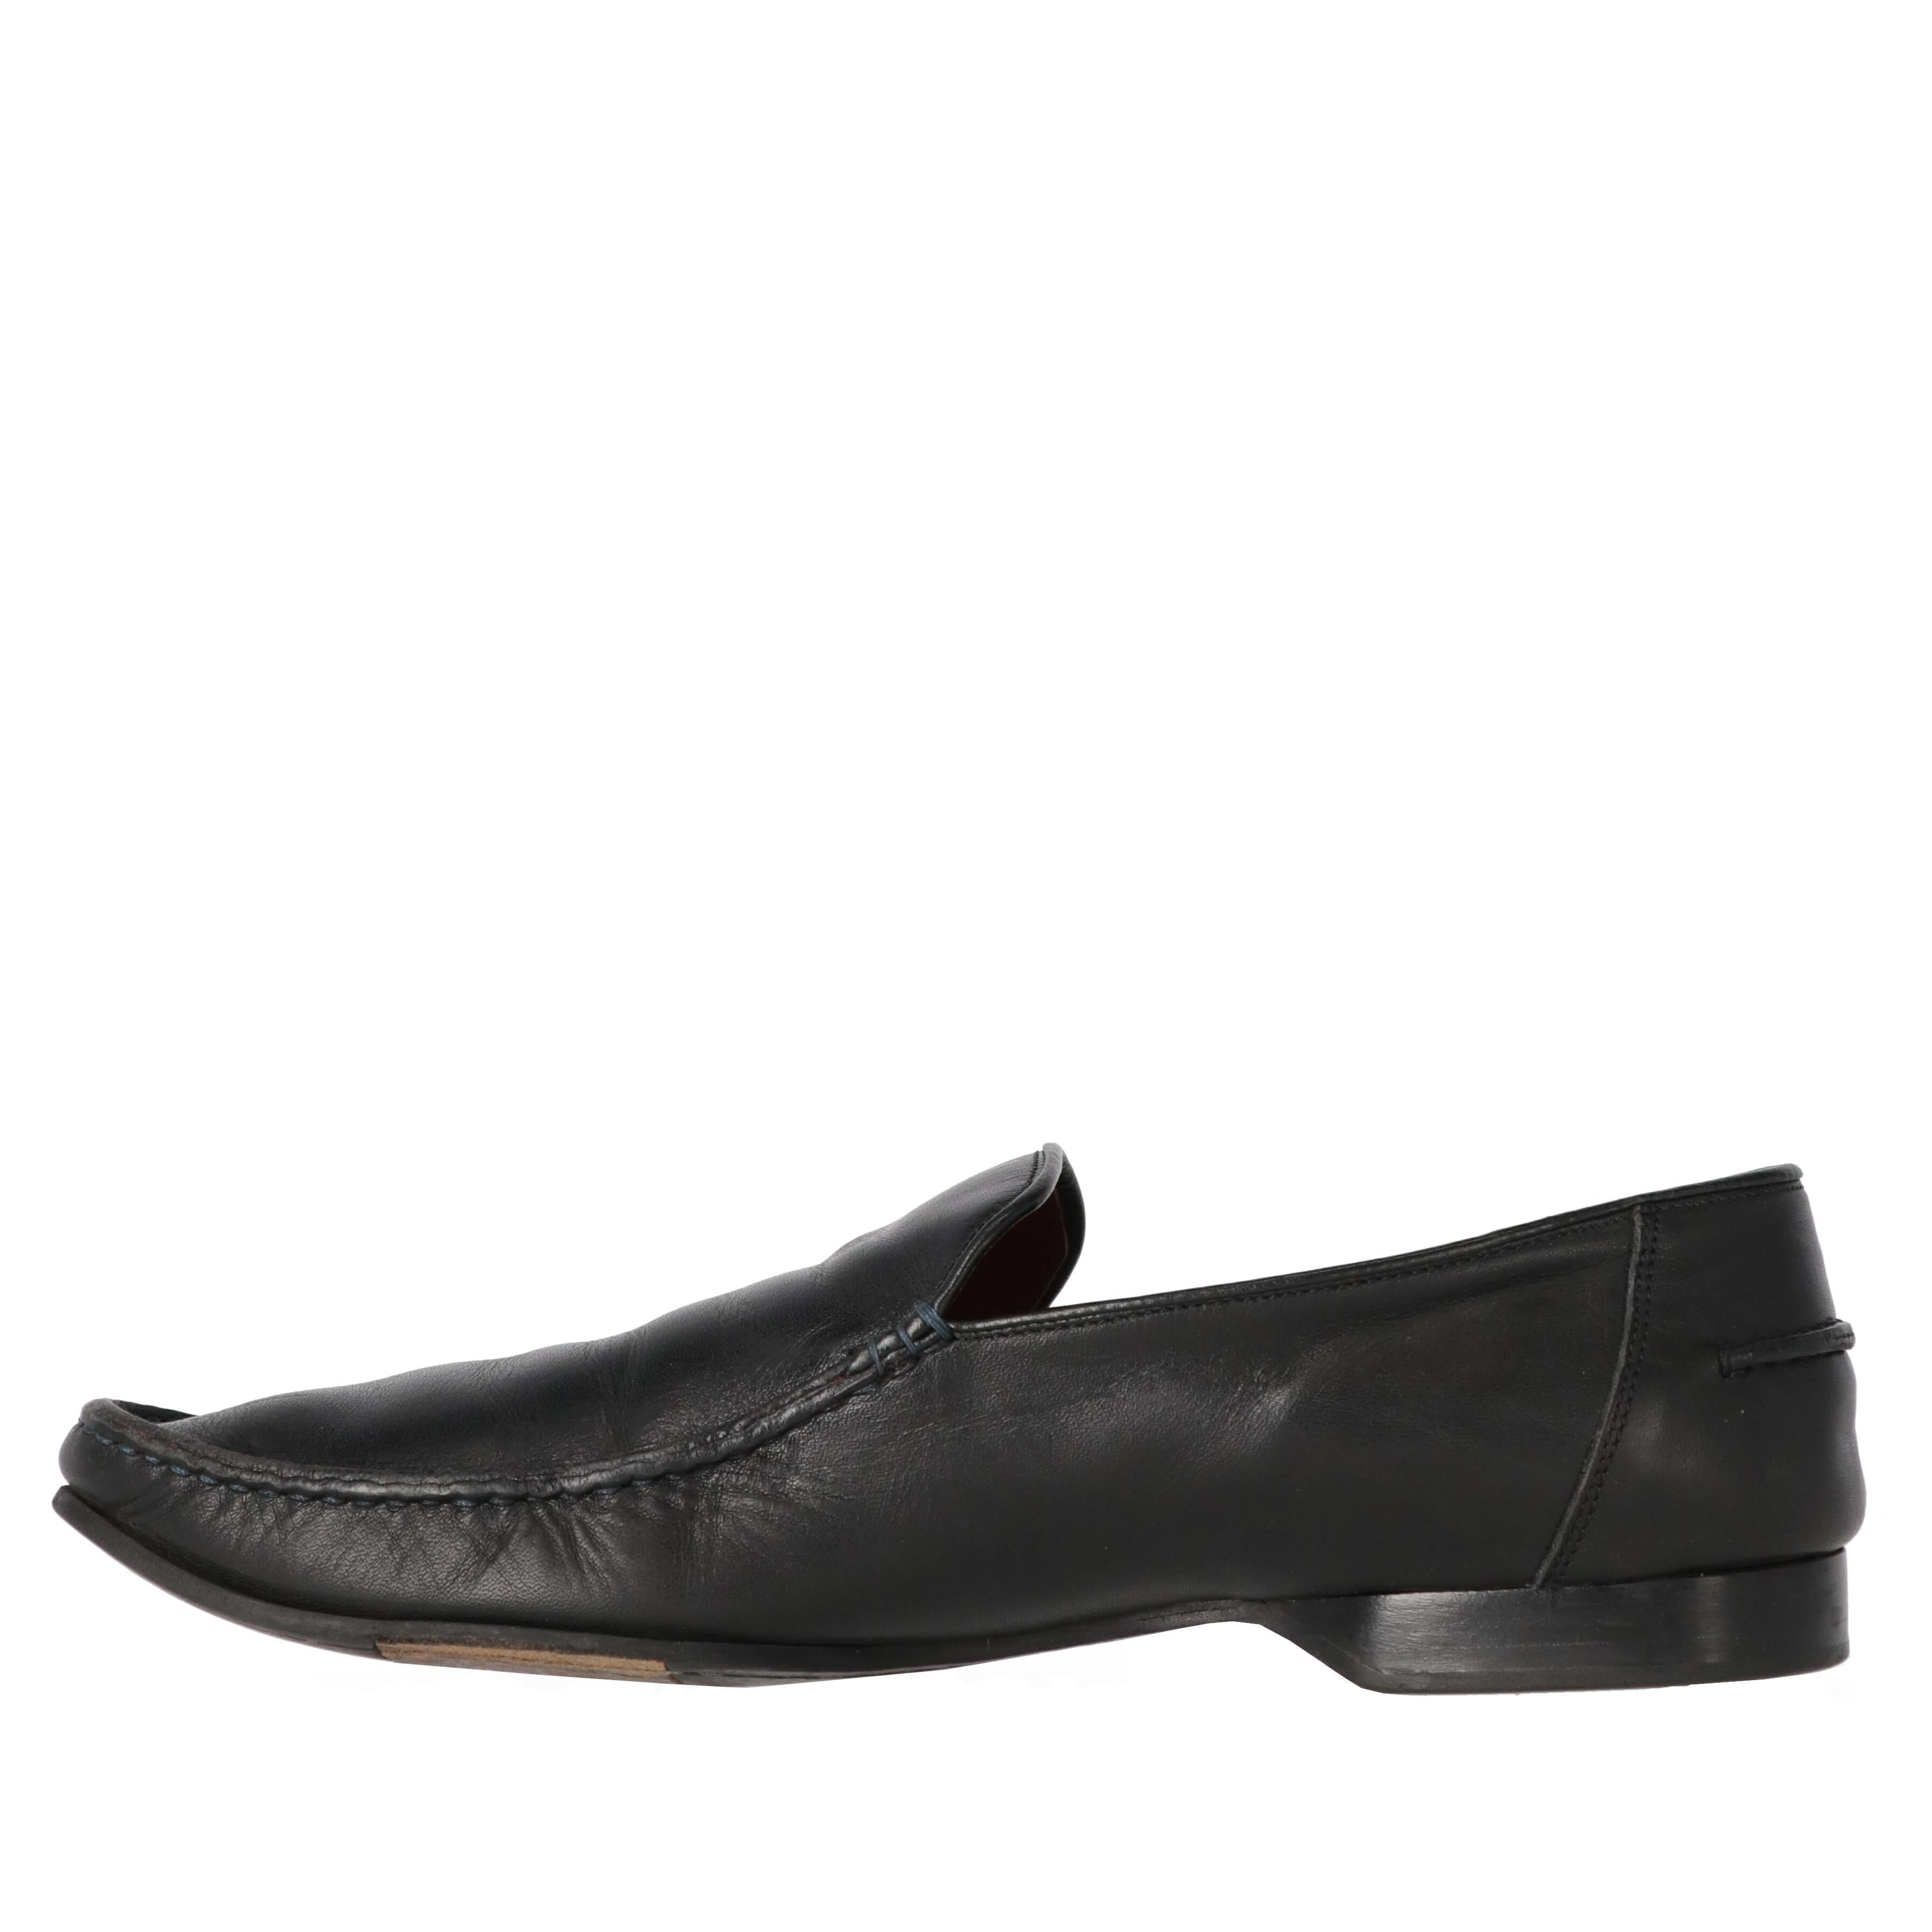 Gianfranco Ferré black genuine leather loafers, with slighlty pointed toe. The shoes show some creases and signs of wear on the leather and sole, as shown in the pictures. 

Years: 2000s 

Made in Italy 
Size: 44 EU 

Length insole: 30 cm